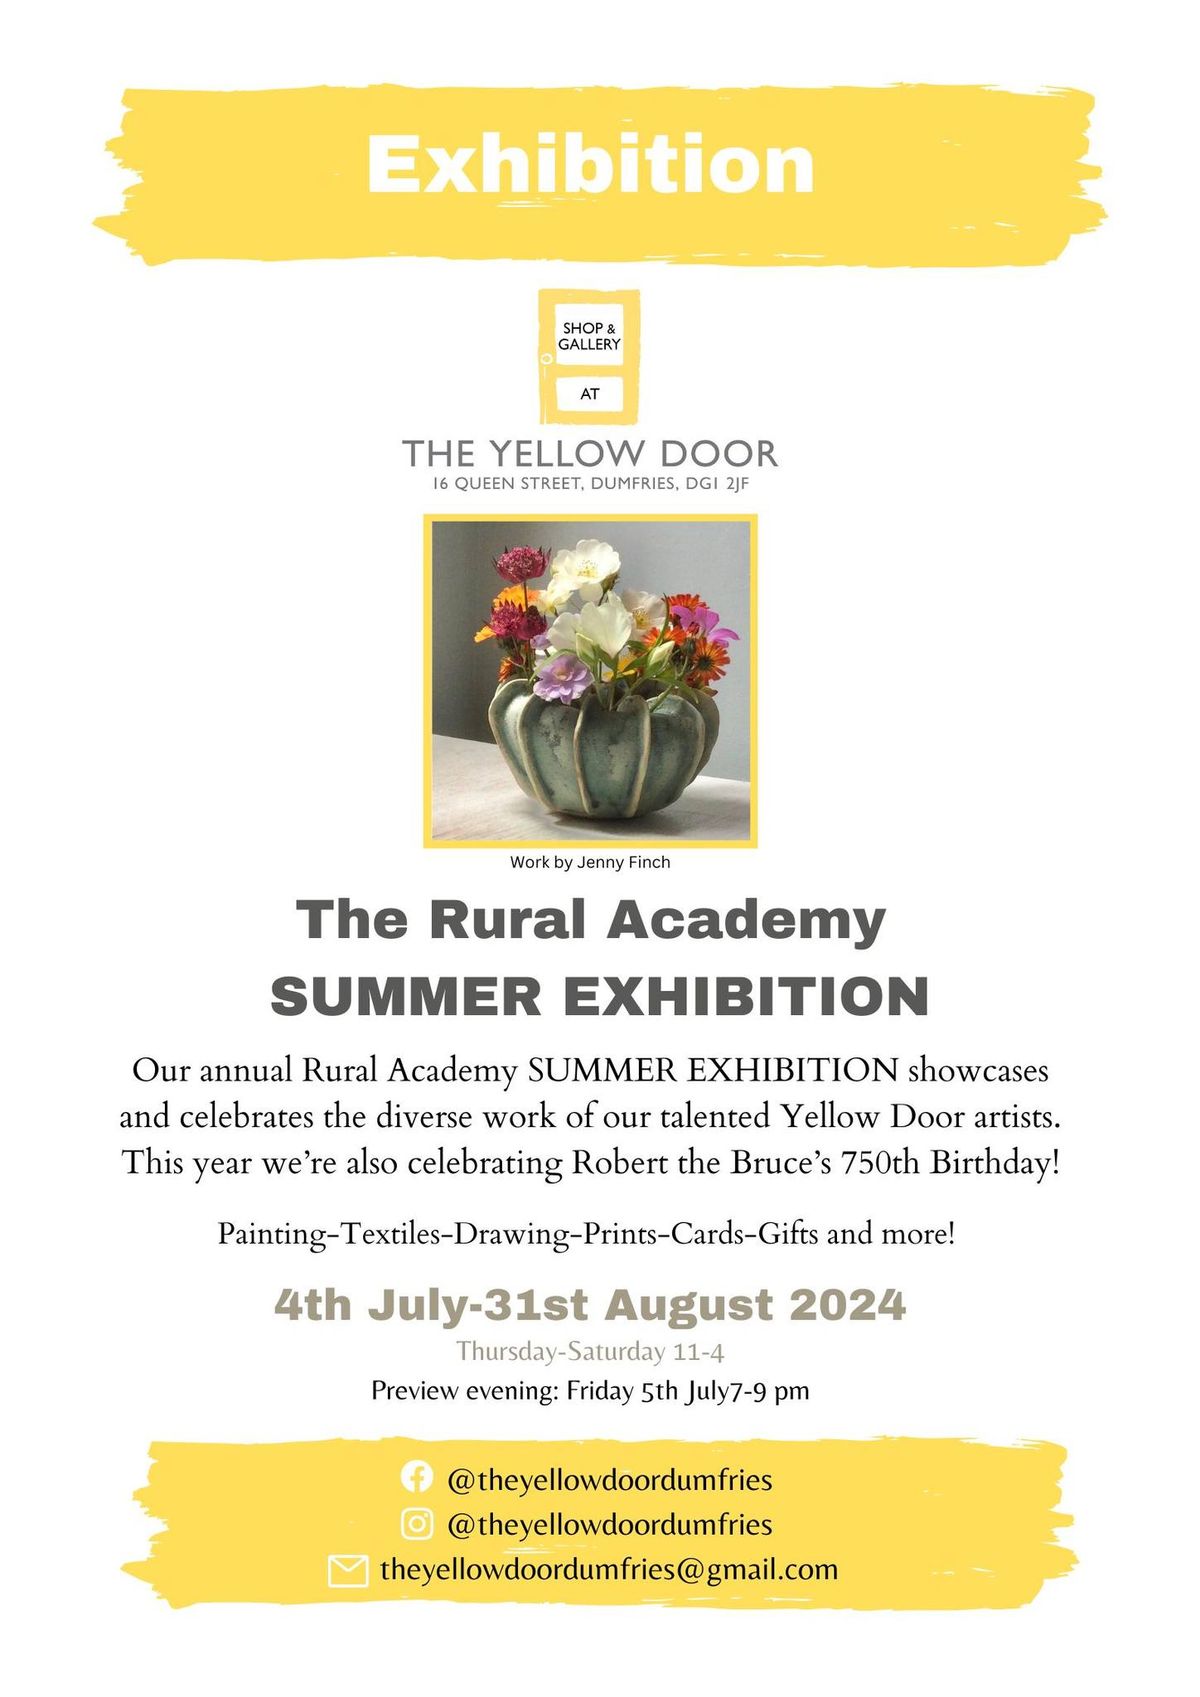 Preview Evening: The Rural Academy SUMMER EXHIBITION 